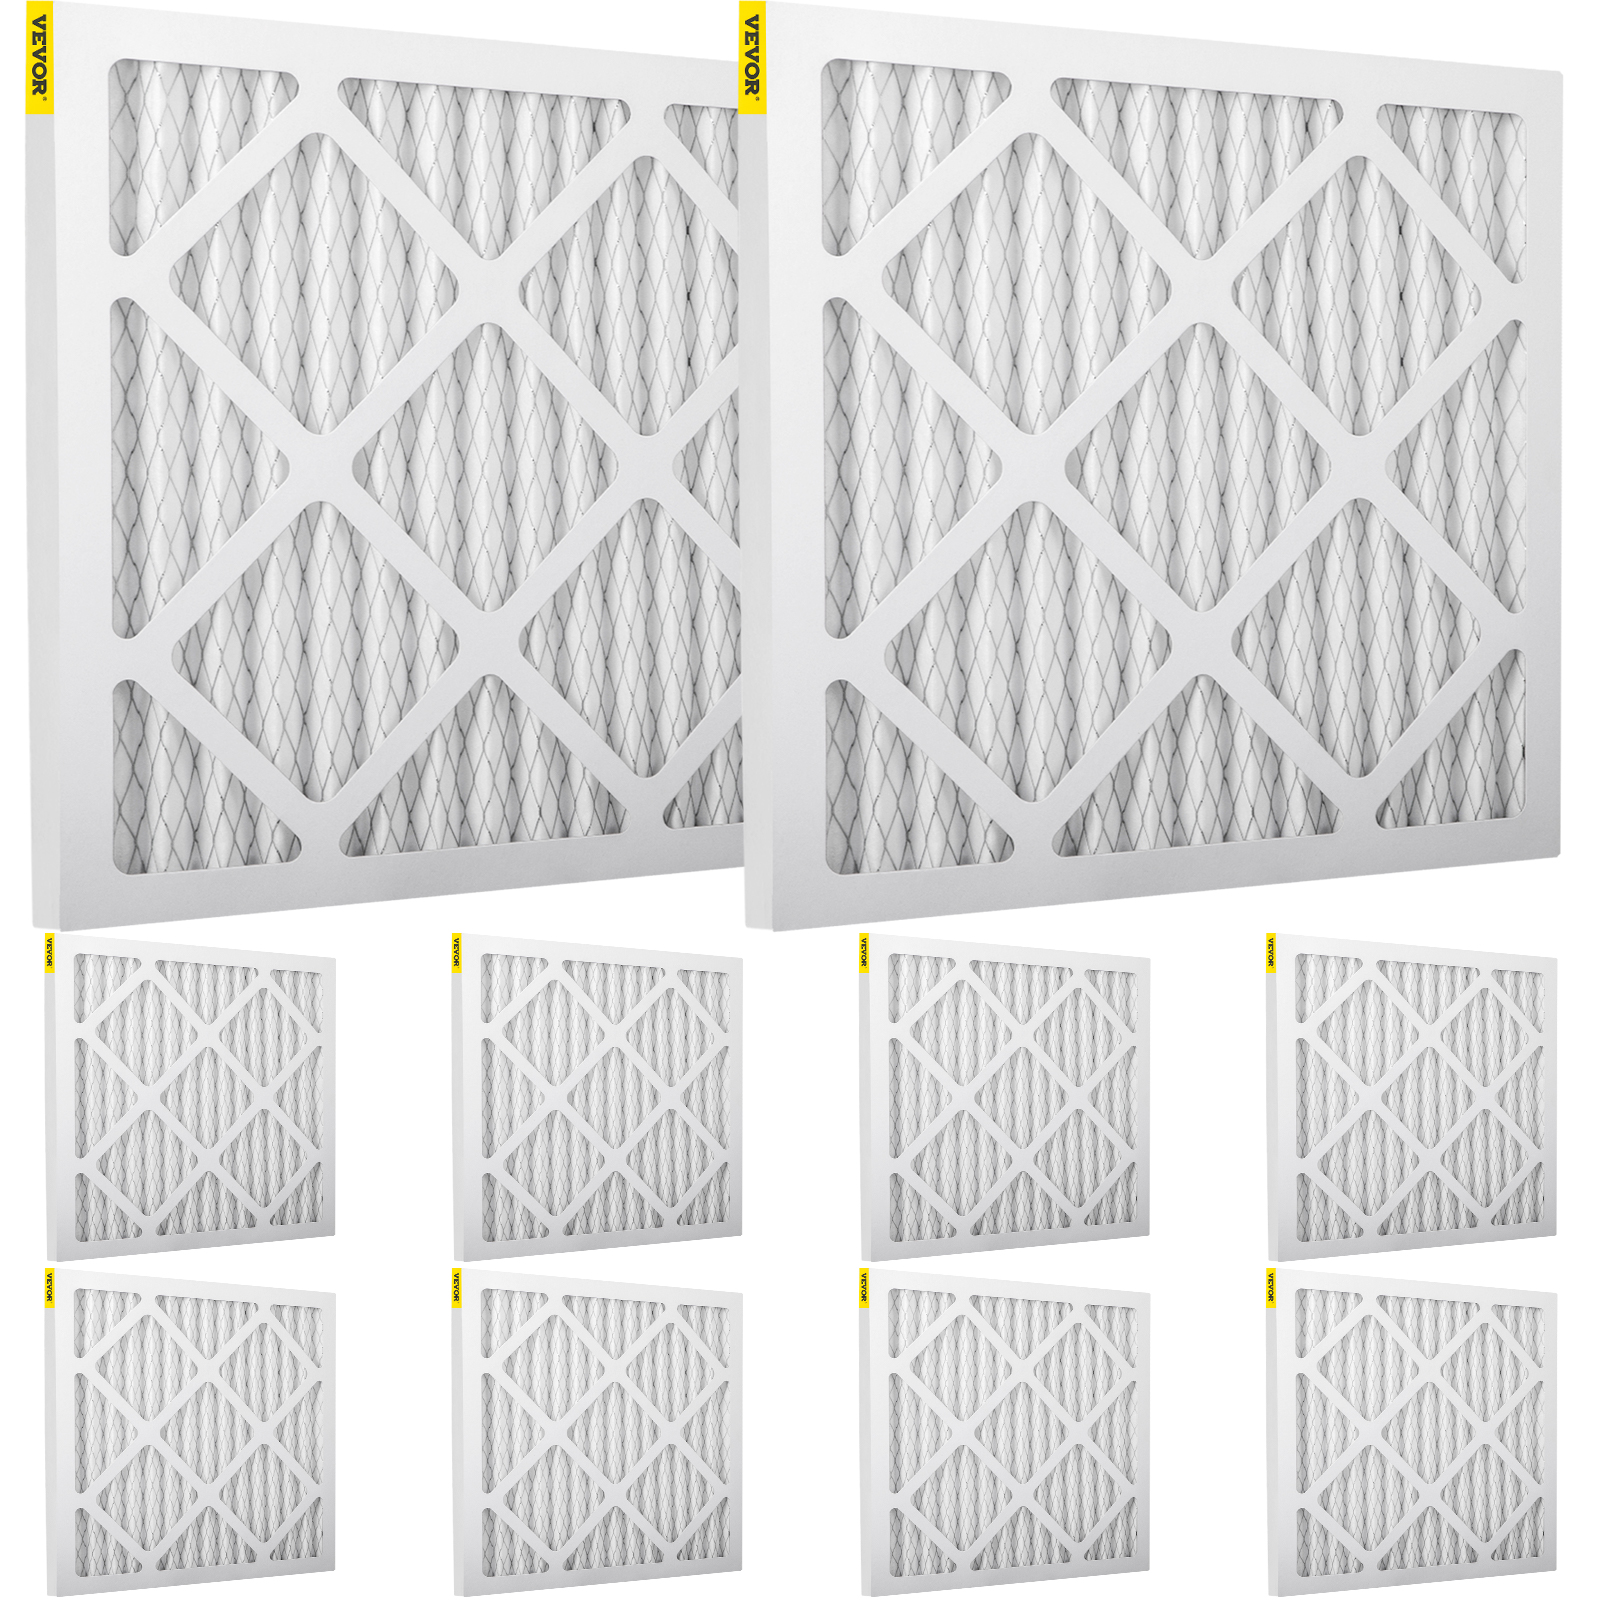 Vevor Filter Replacementset Pleated Air Filter16 X16 In 10pcs Merv 8 White от Vevor Many GEOs